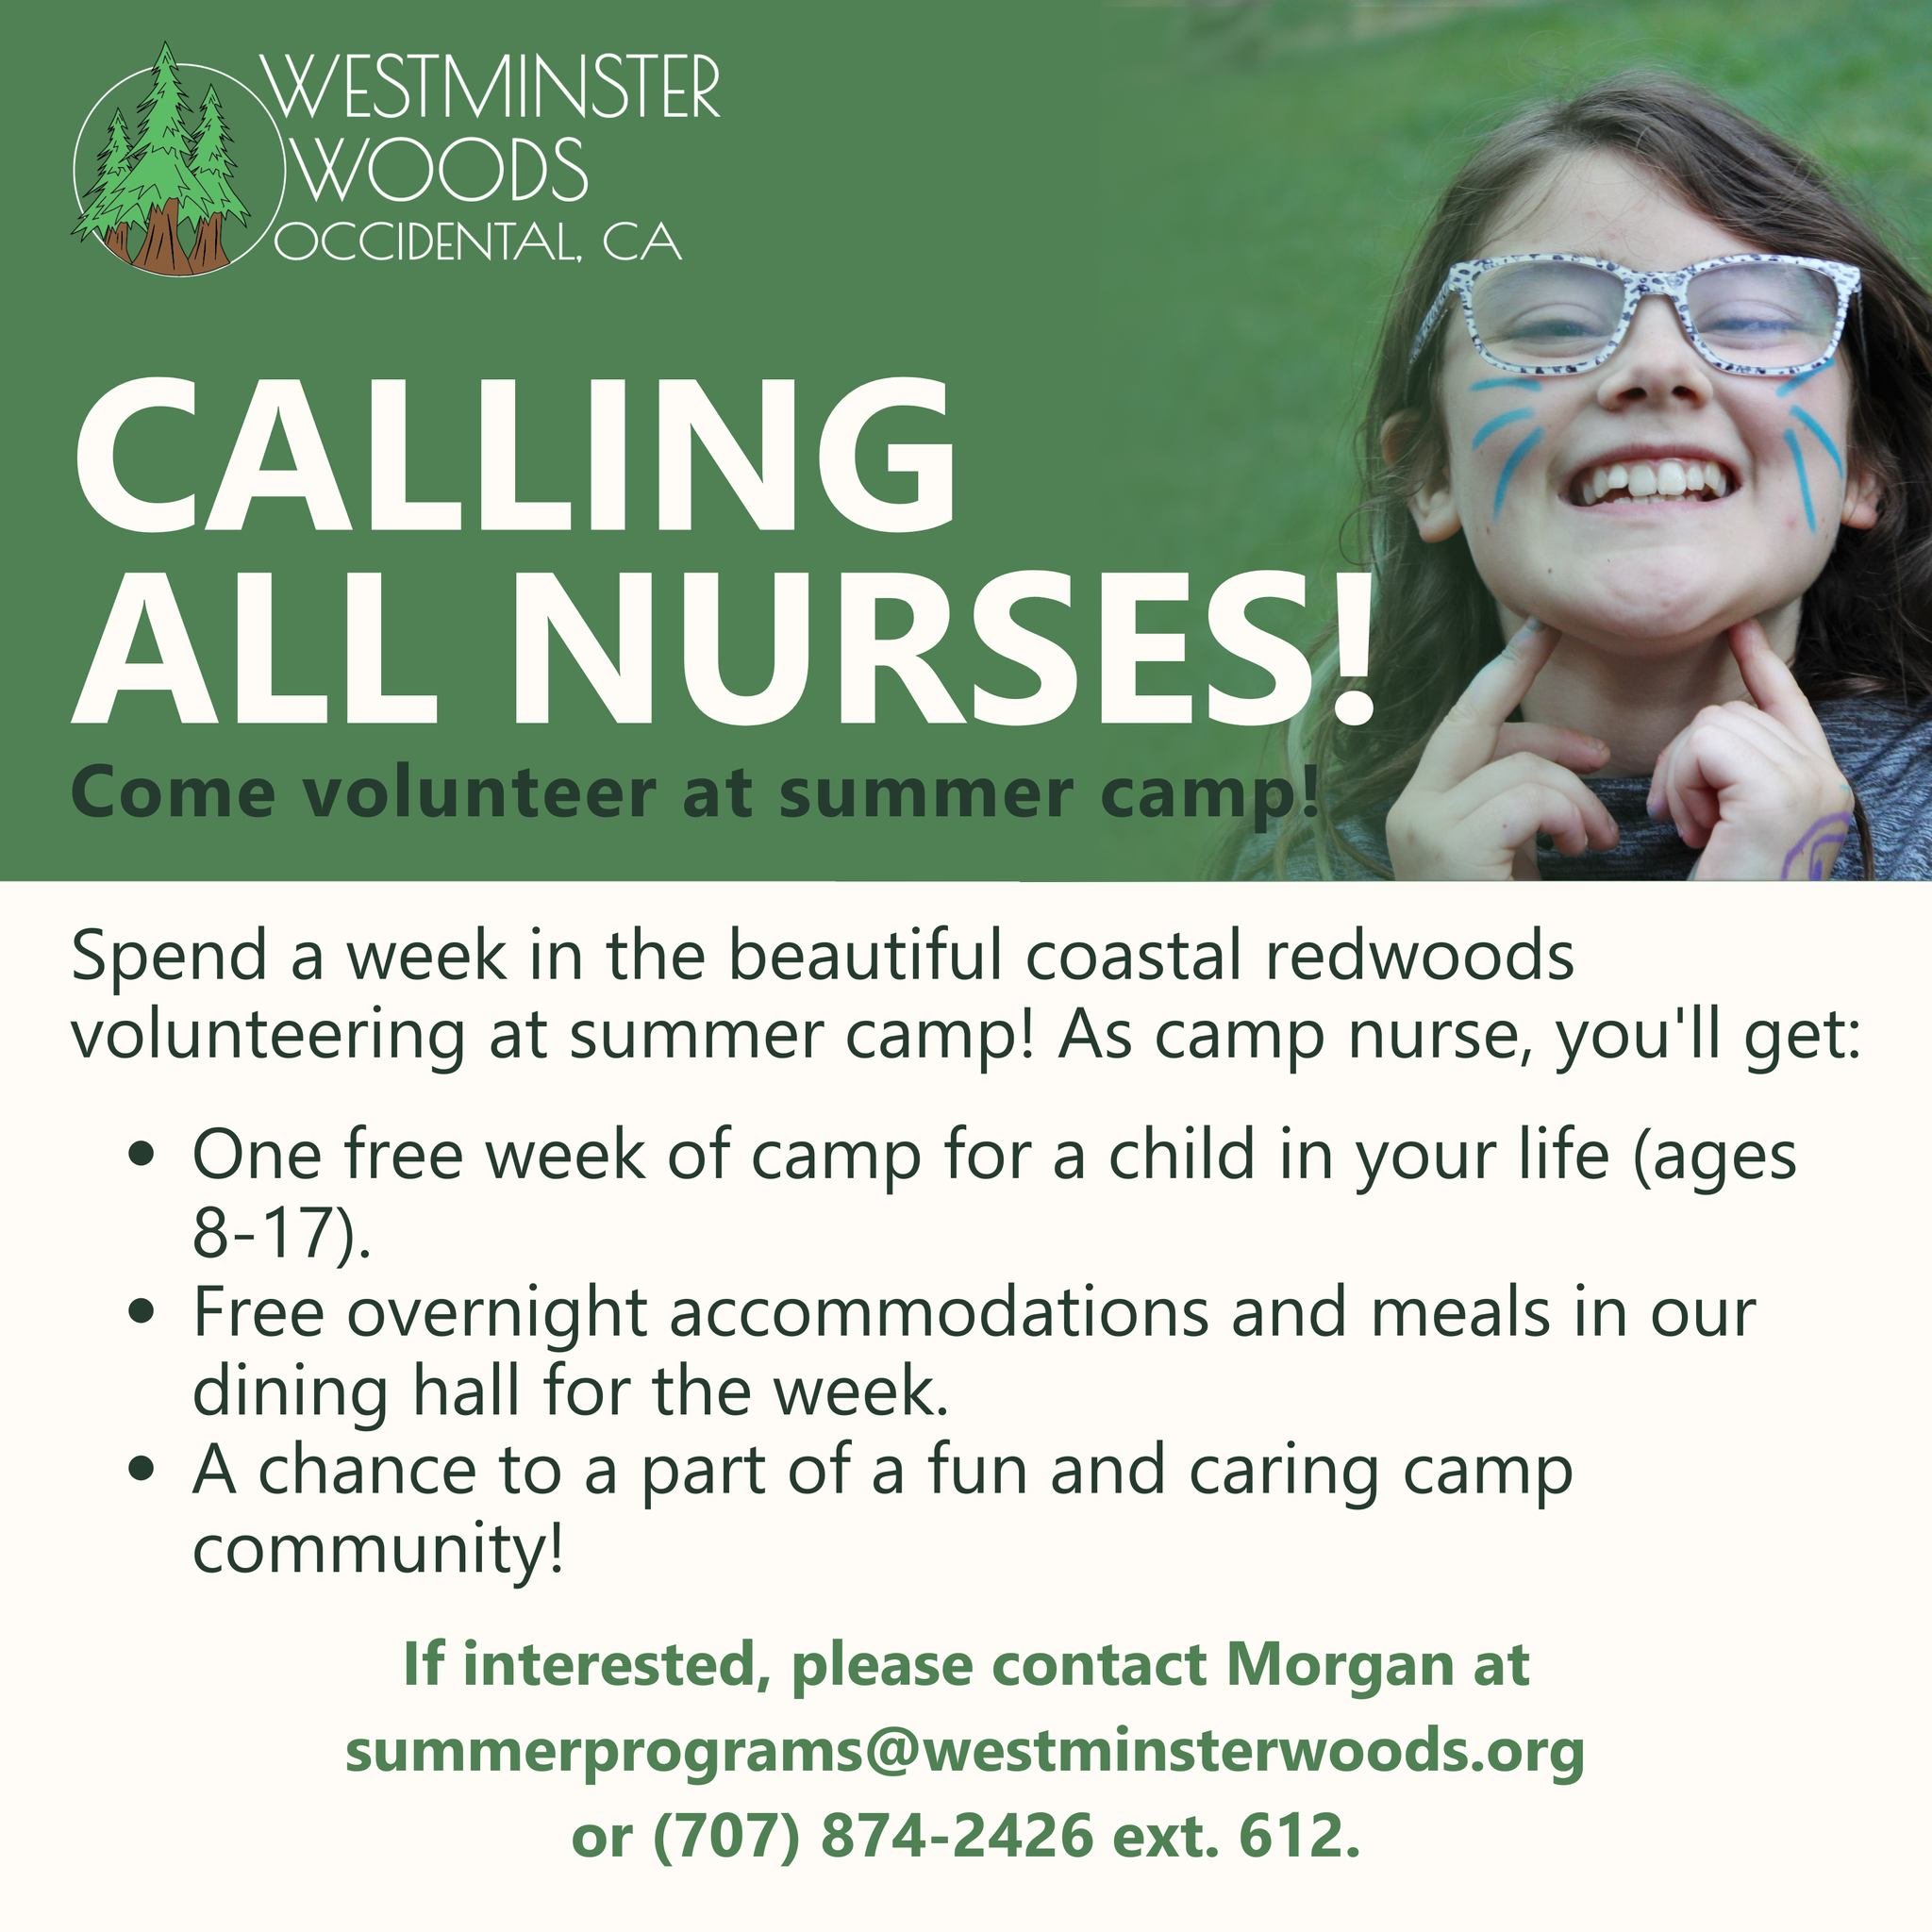 We&rsquo;re looking for nurses to volunteer at summer camp this year!! We need nurse volunteers for the following sessions:

Session 1: Camp Heartwood (June 16th-21st).
Session 2: Camp Heartwood (June 23rd-28th).
Session 3: Camp Heartwood (June 30th-